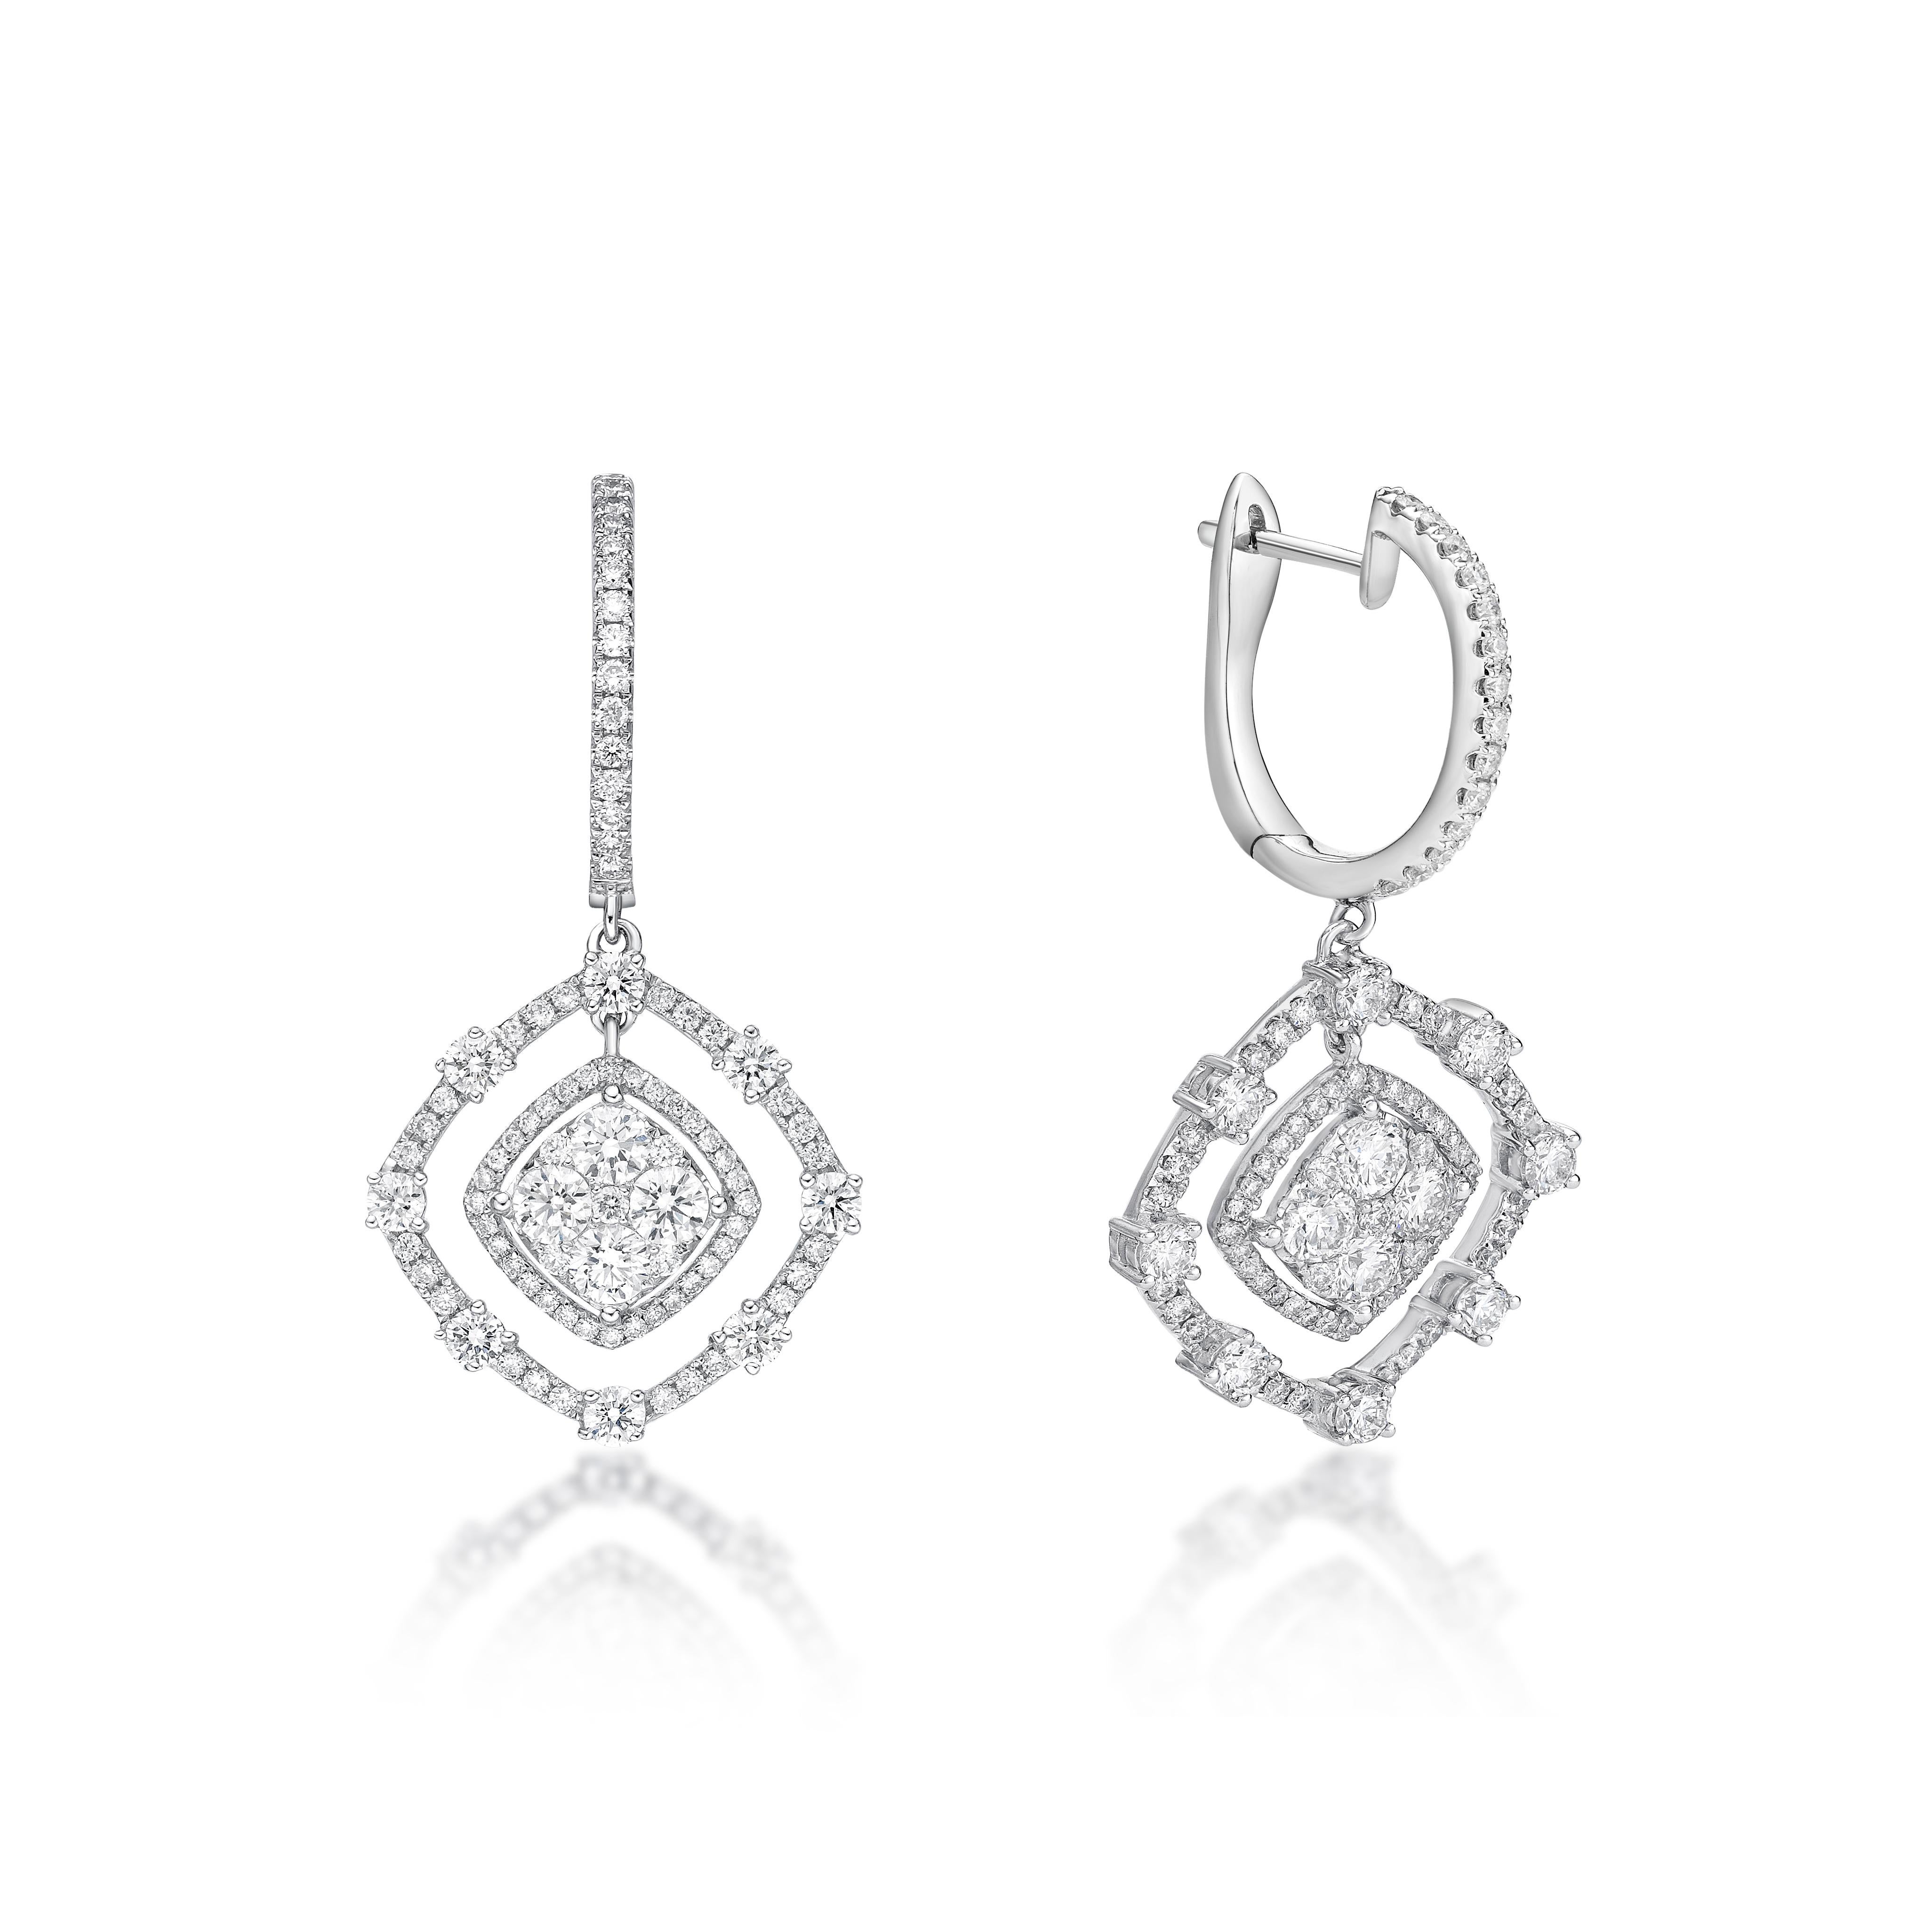 These shimmering drop earrings are a terrific finish to an already-beautiful anytime looks. Crafted in 18K white gold, each earring features in sparkling diamonds. Buffed to a brilliant luster, these earrings secure with lever backs.

This earring